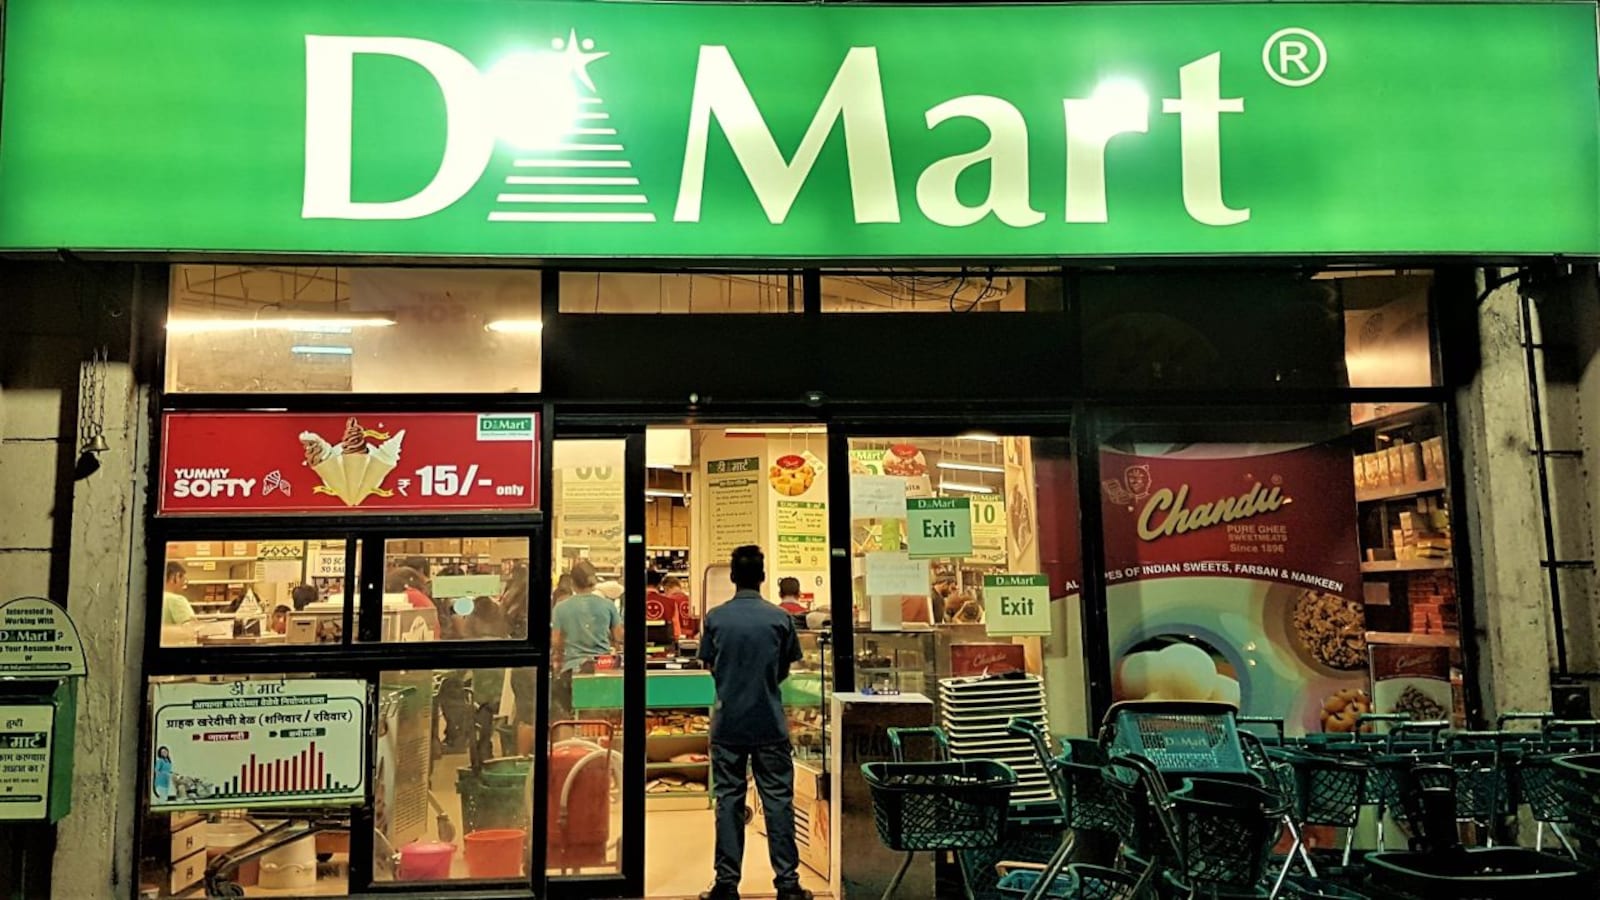 DMart share price: DMart stock gains on opening of new store in Tamil Nadu;  total store count rises to 369